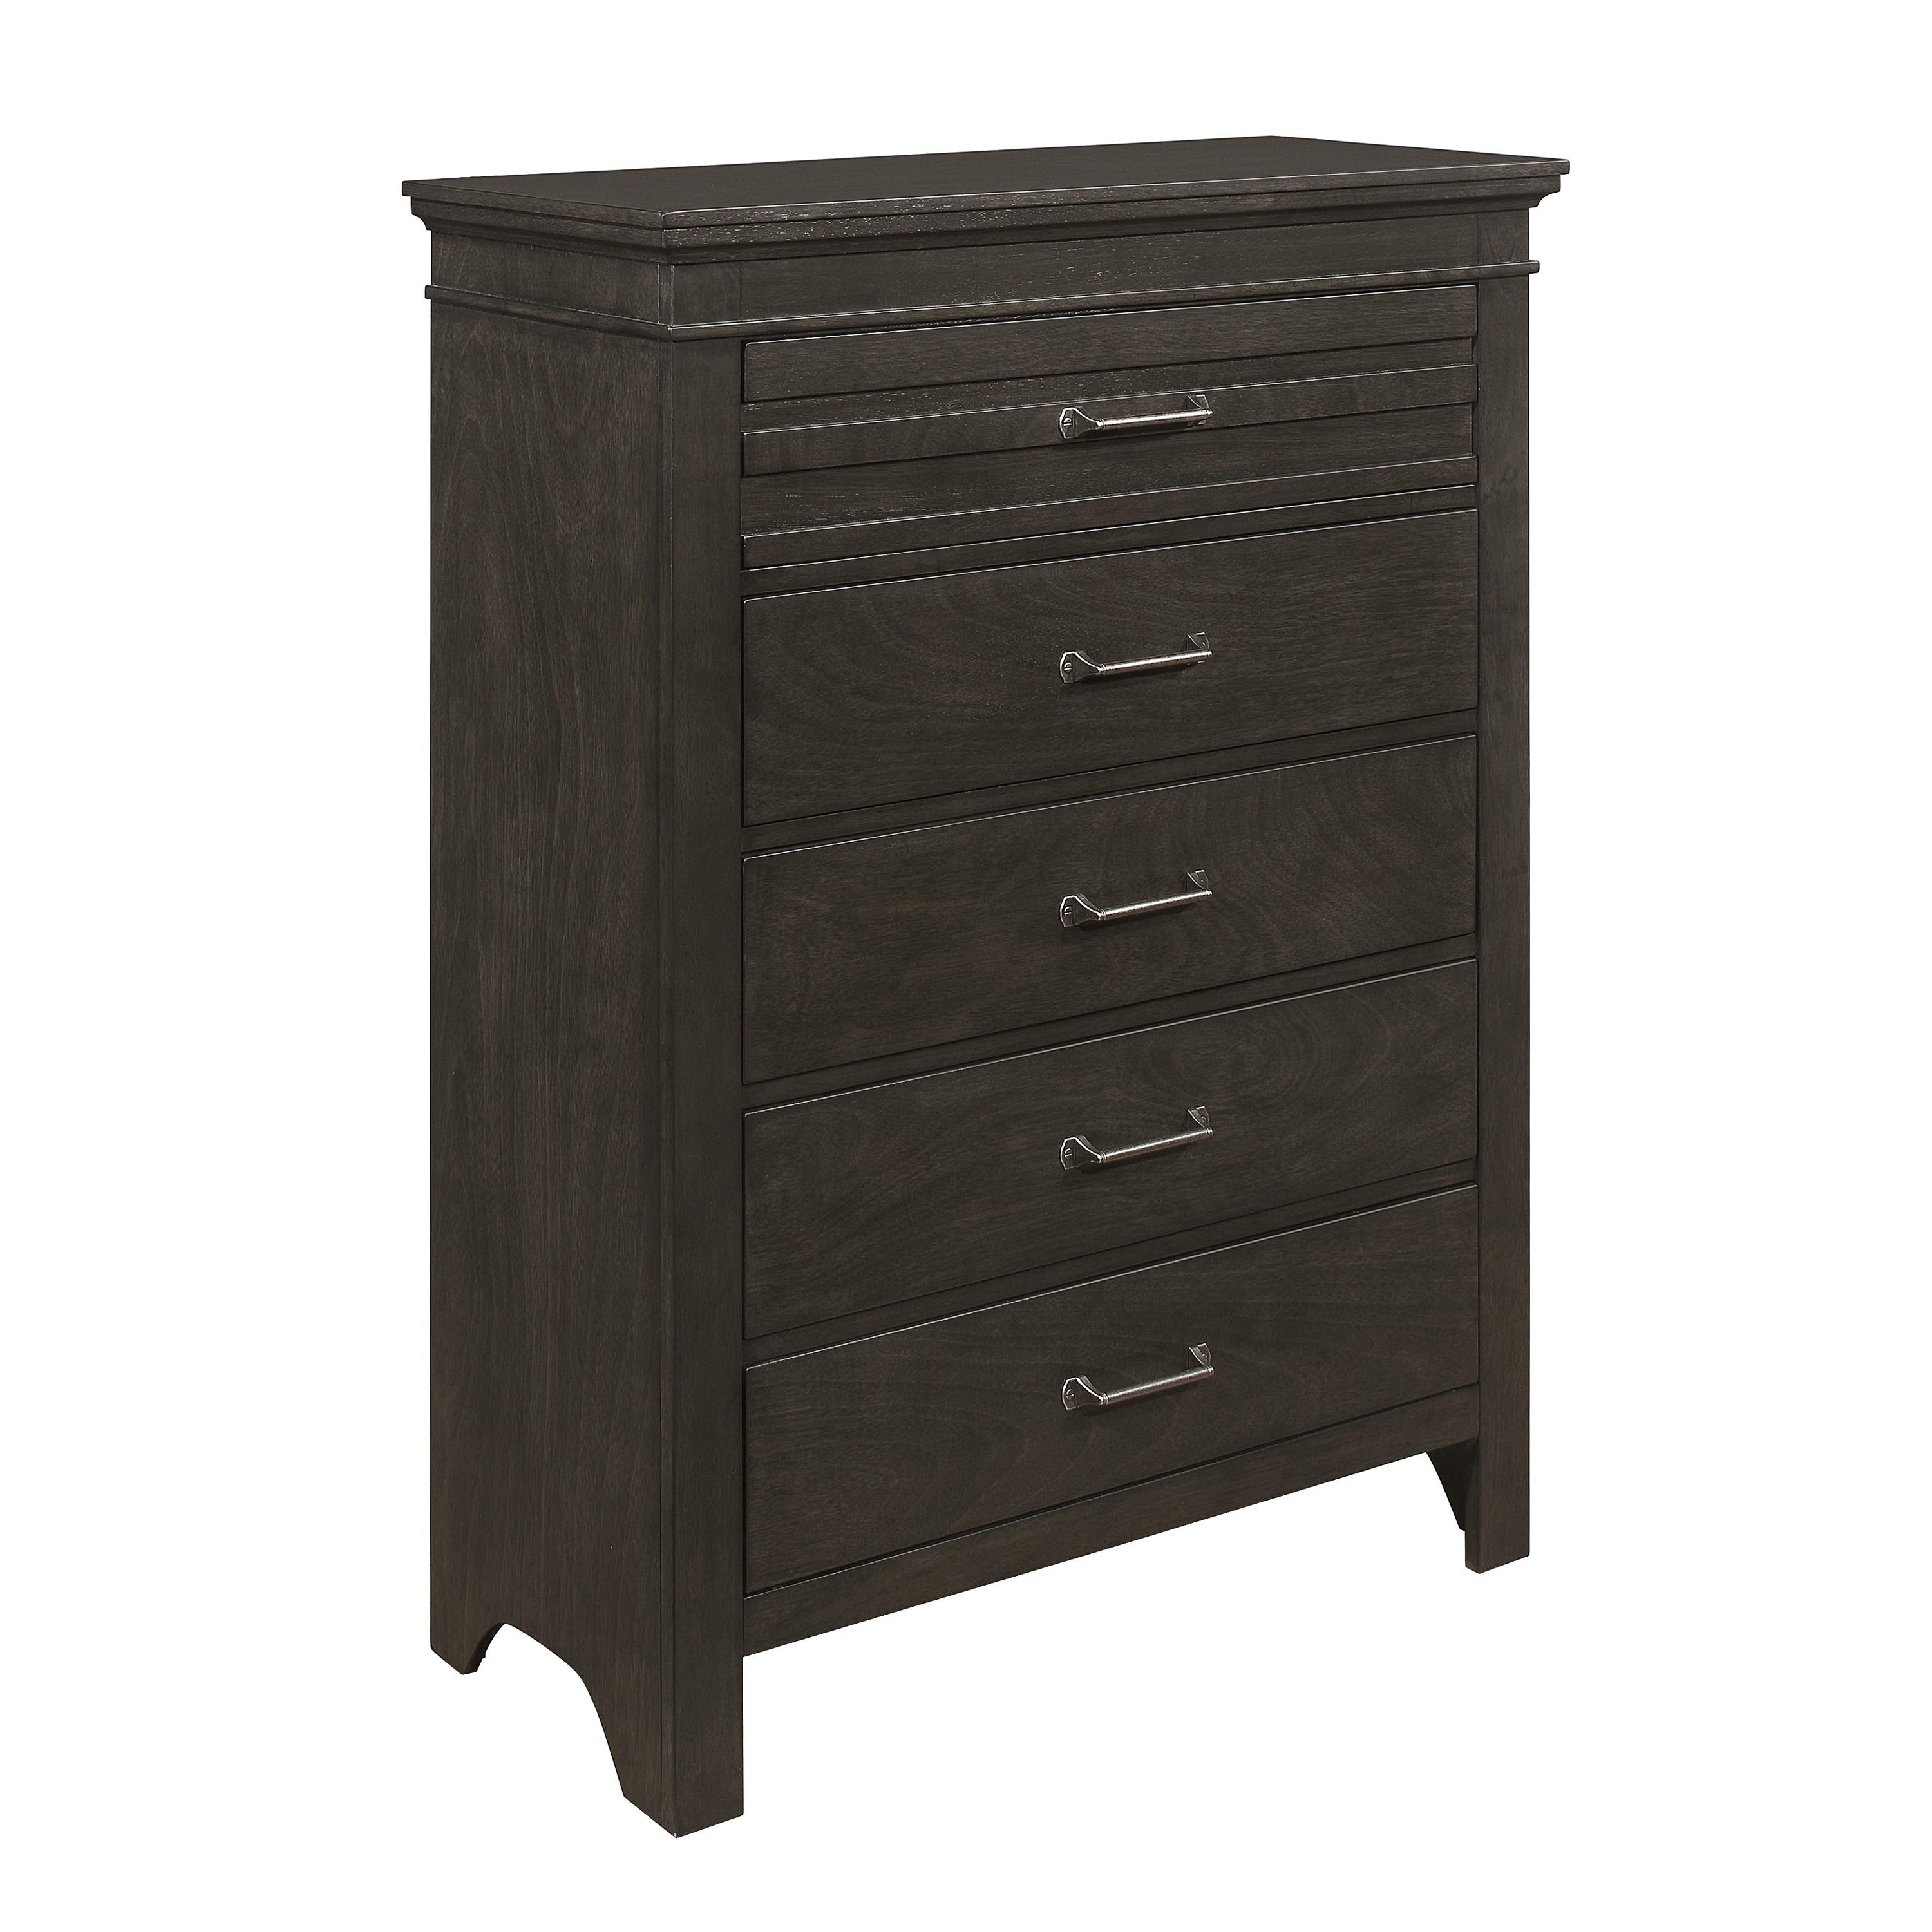 Transitional Chest 1675-9 Blaire Farm 1675-9 in Charcoal 